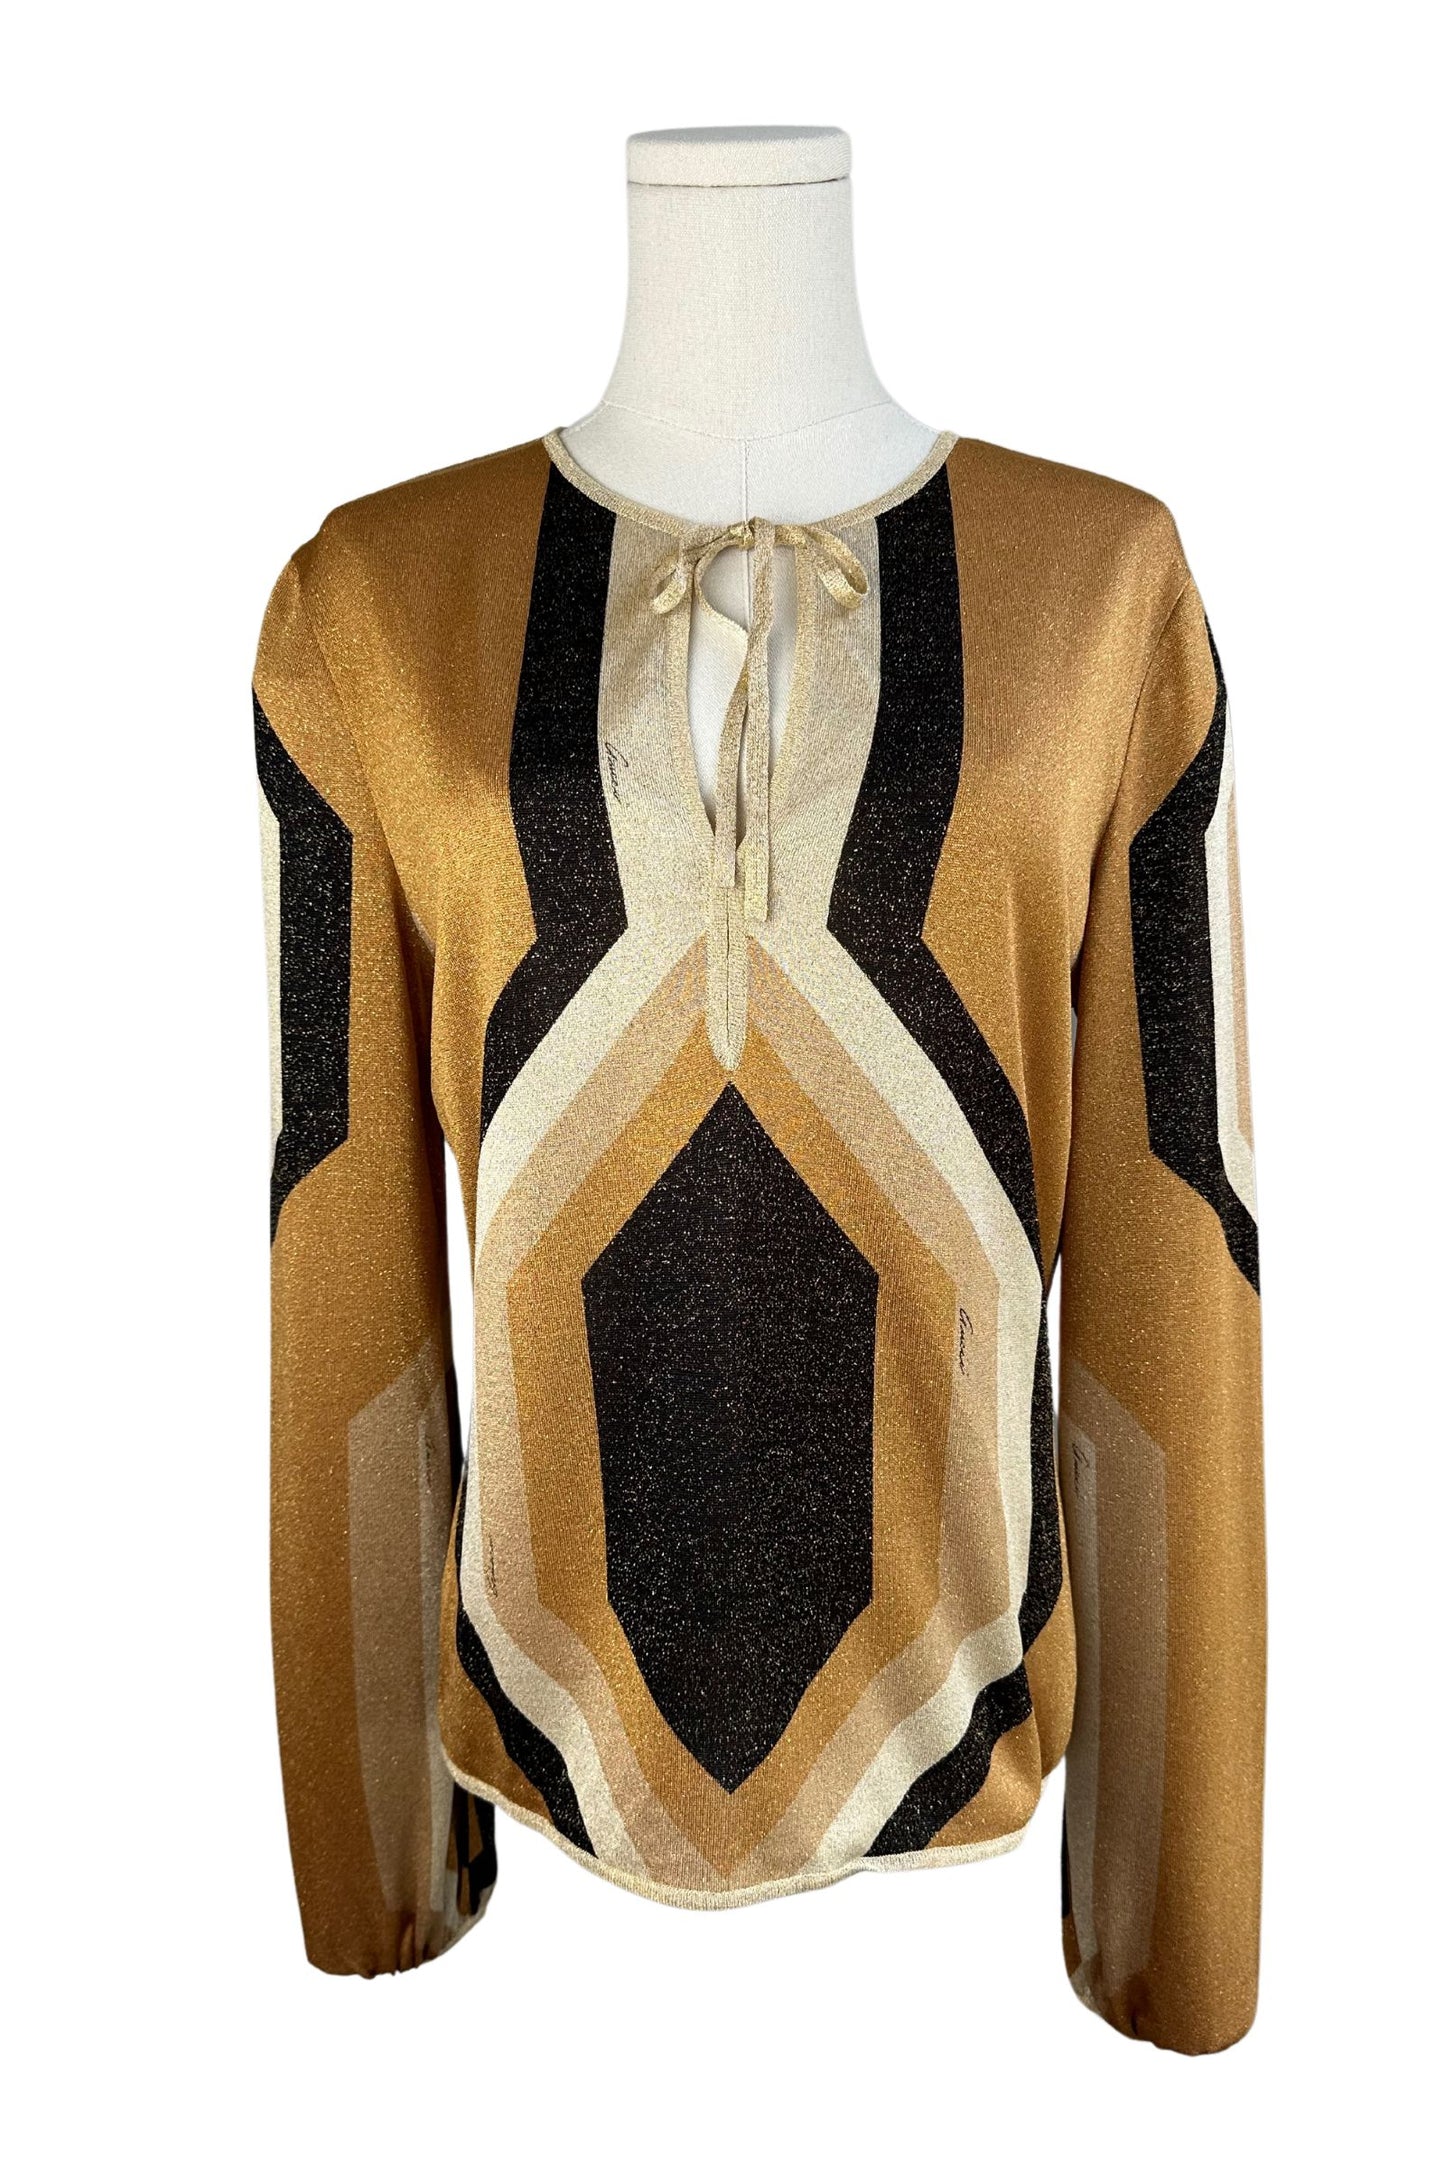 Gucci by Tom Ford F/W 2000 Collection Neutral Toned Kaleidoscope Metallic Lurex Knit Tie Front Blouse Size XL